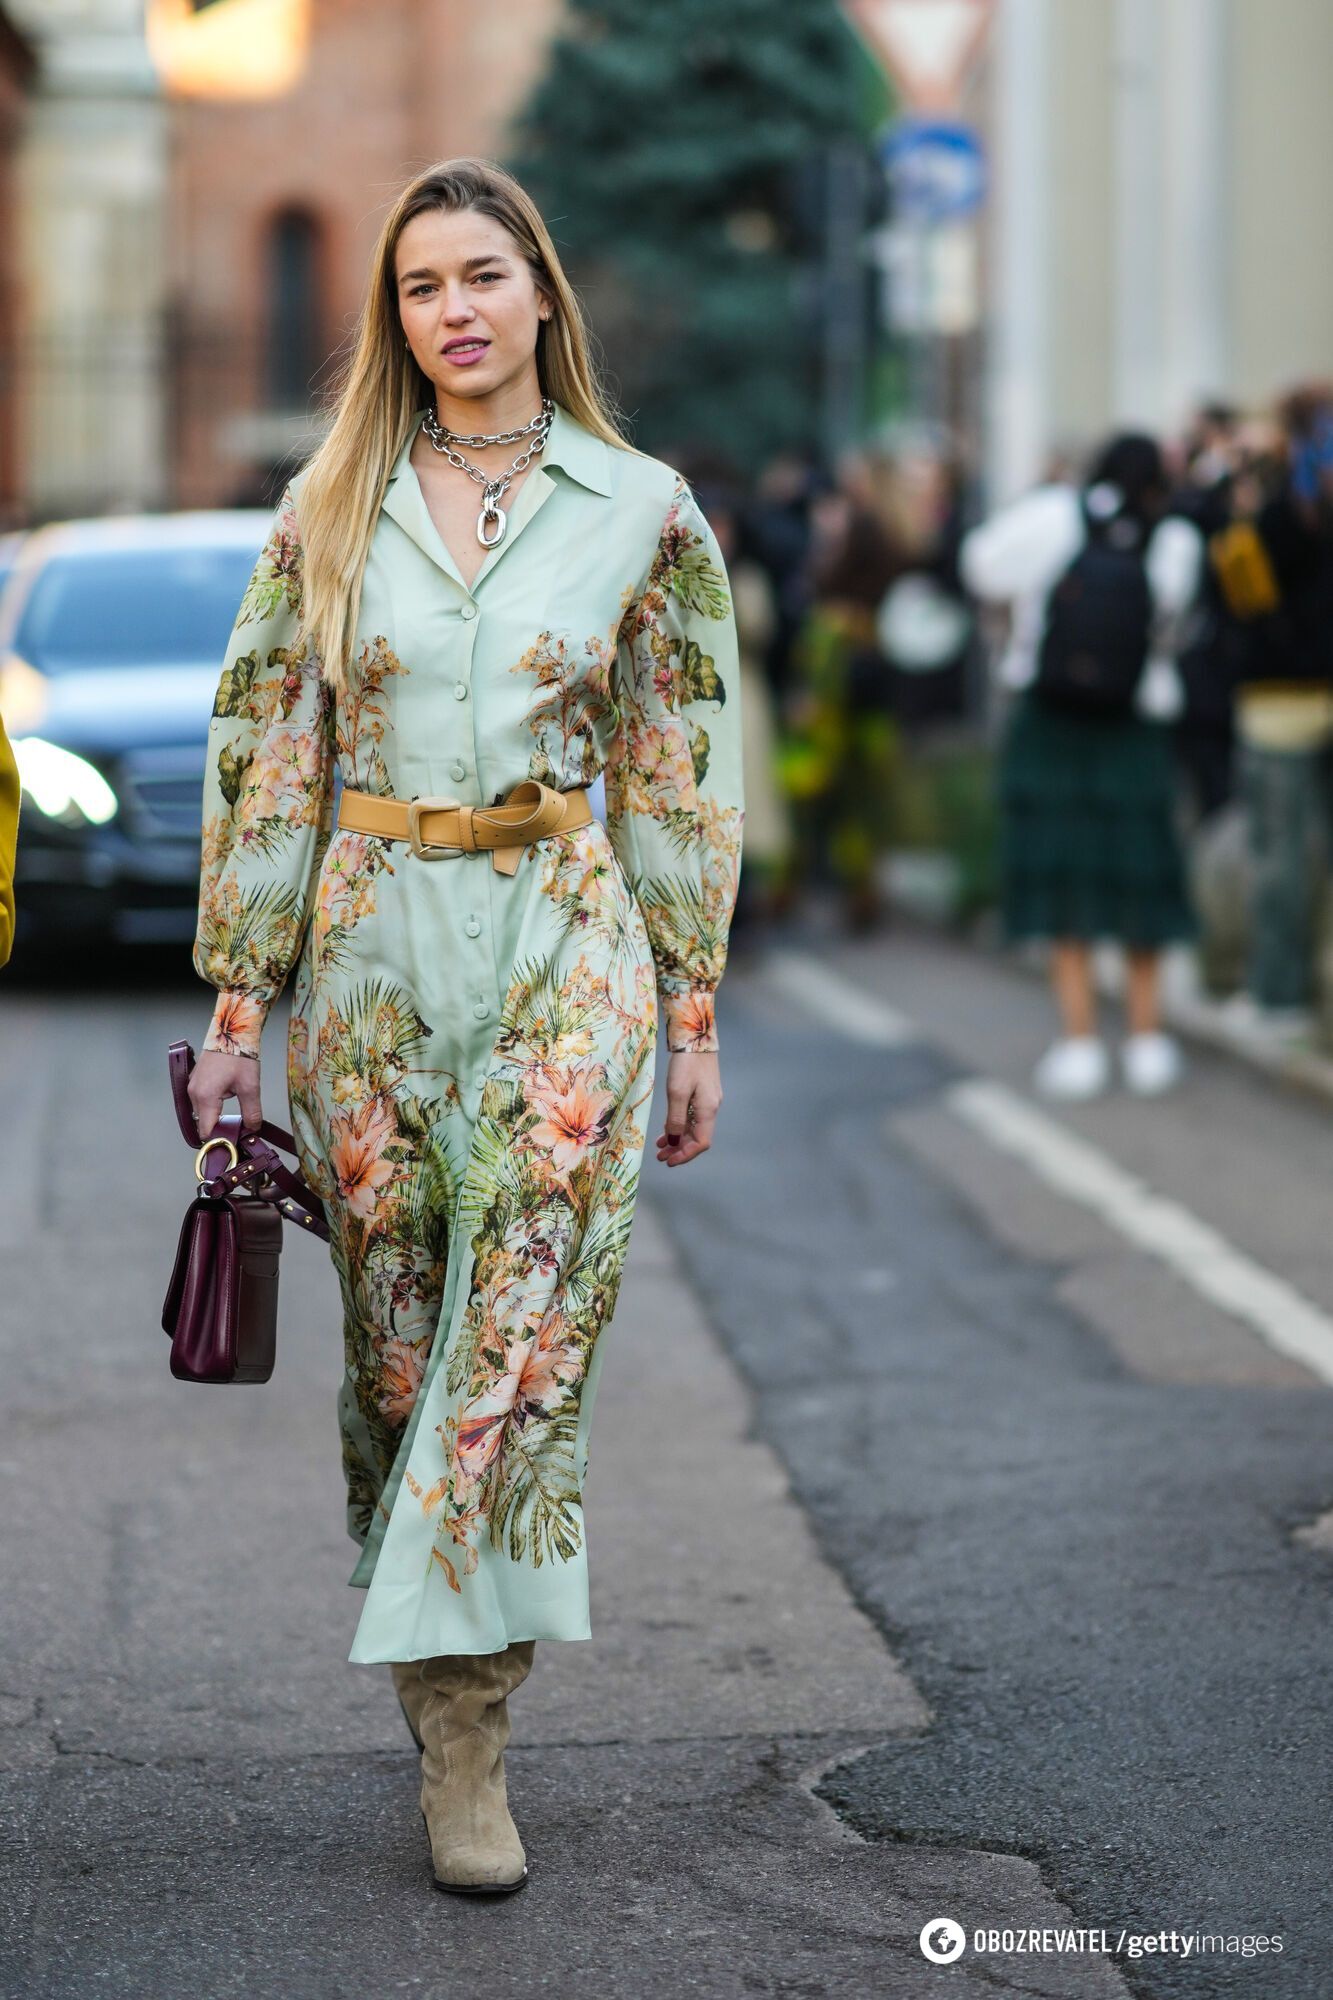 Don't wear them: 5 dress styles that will go out of style in 2024